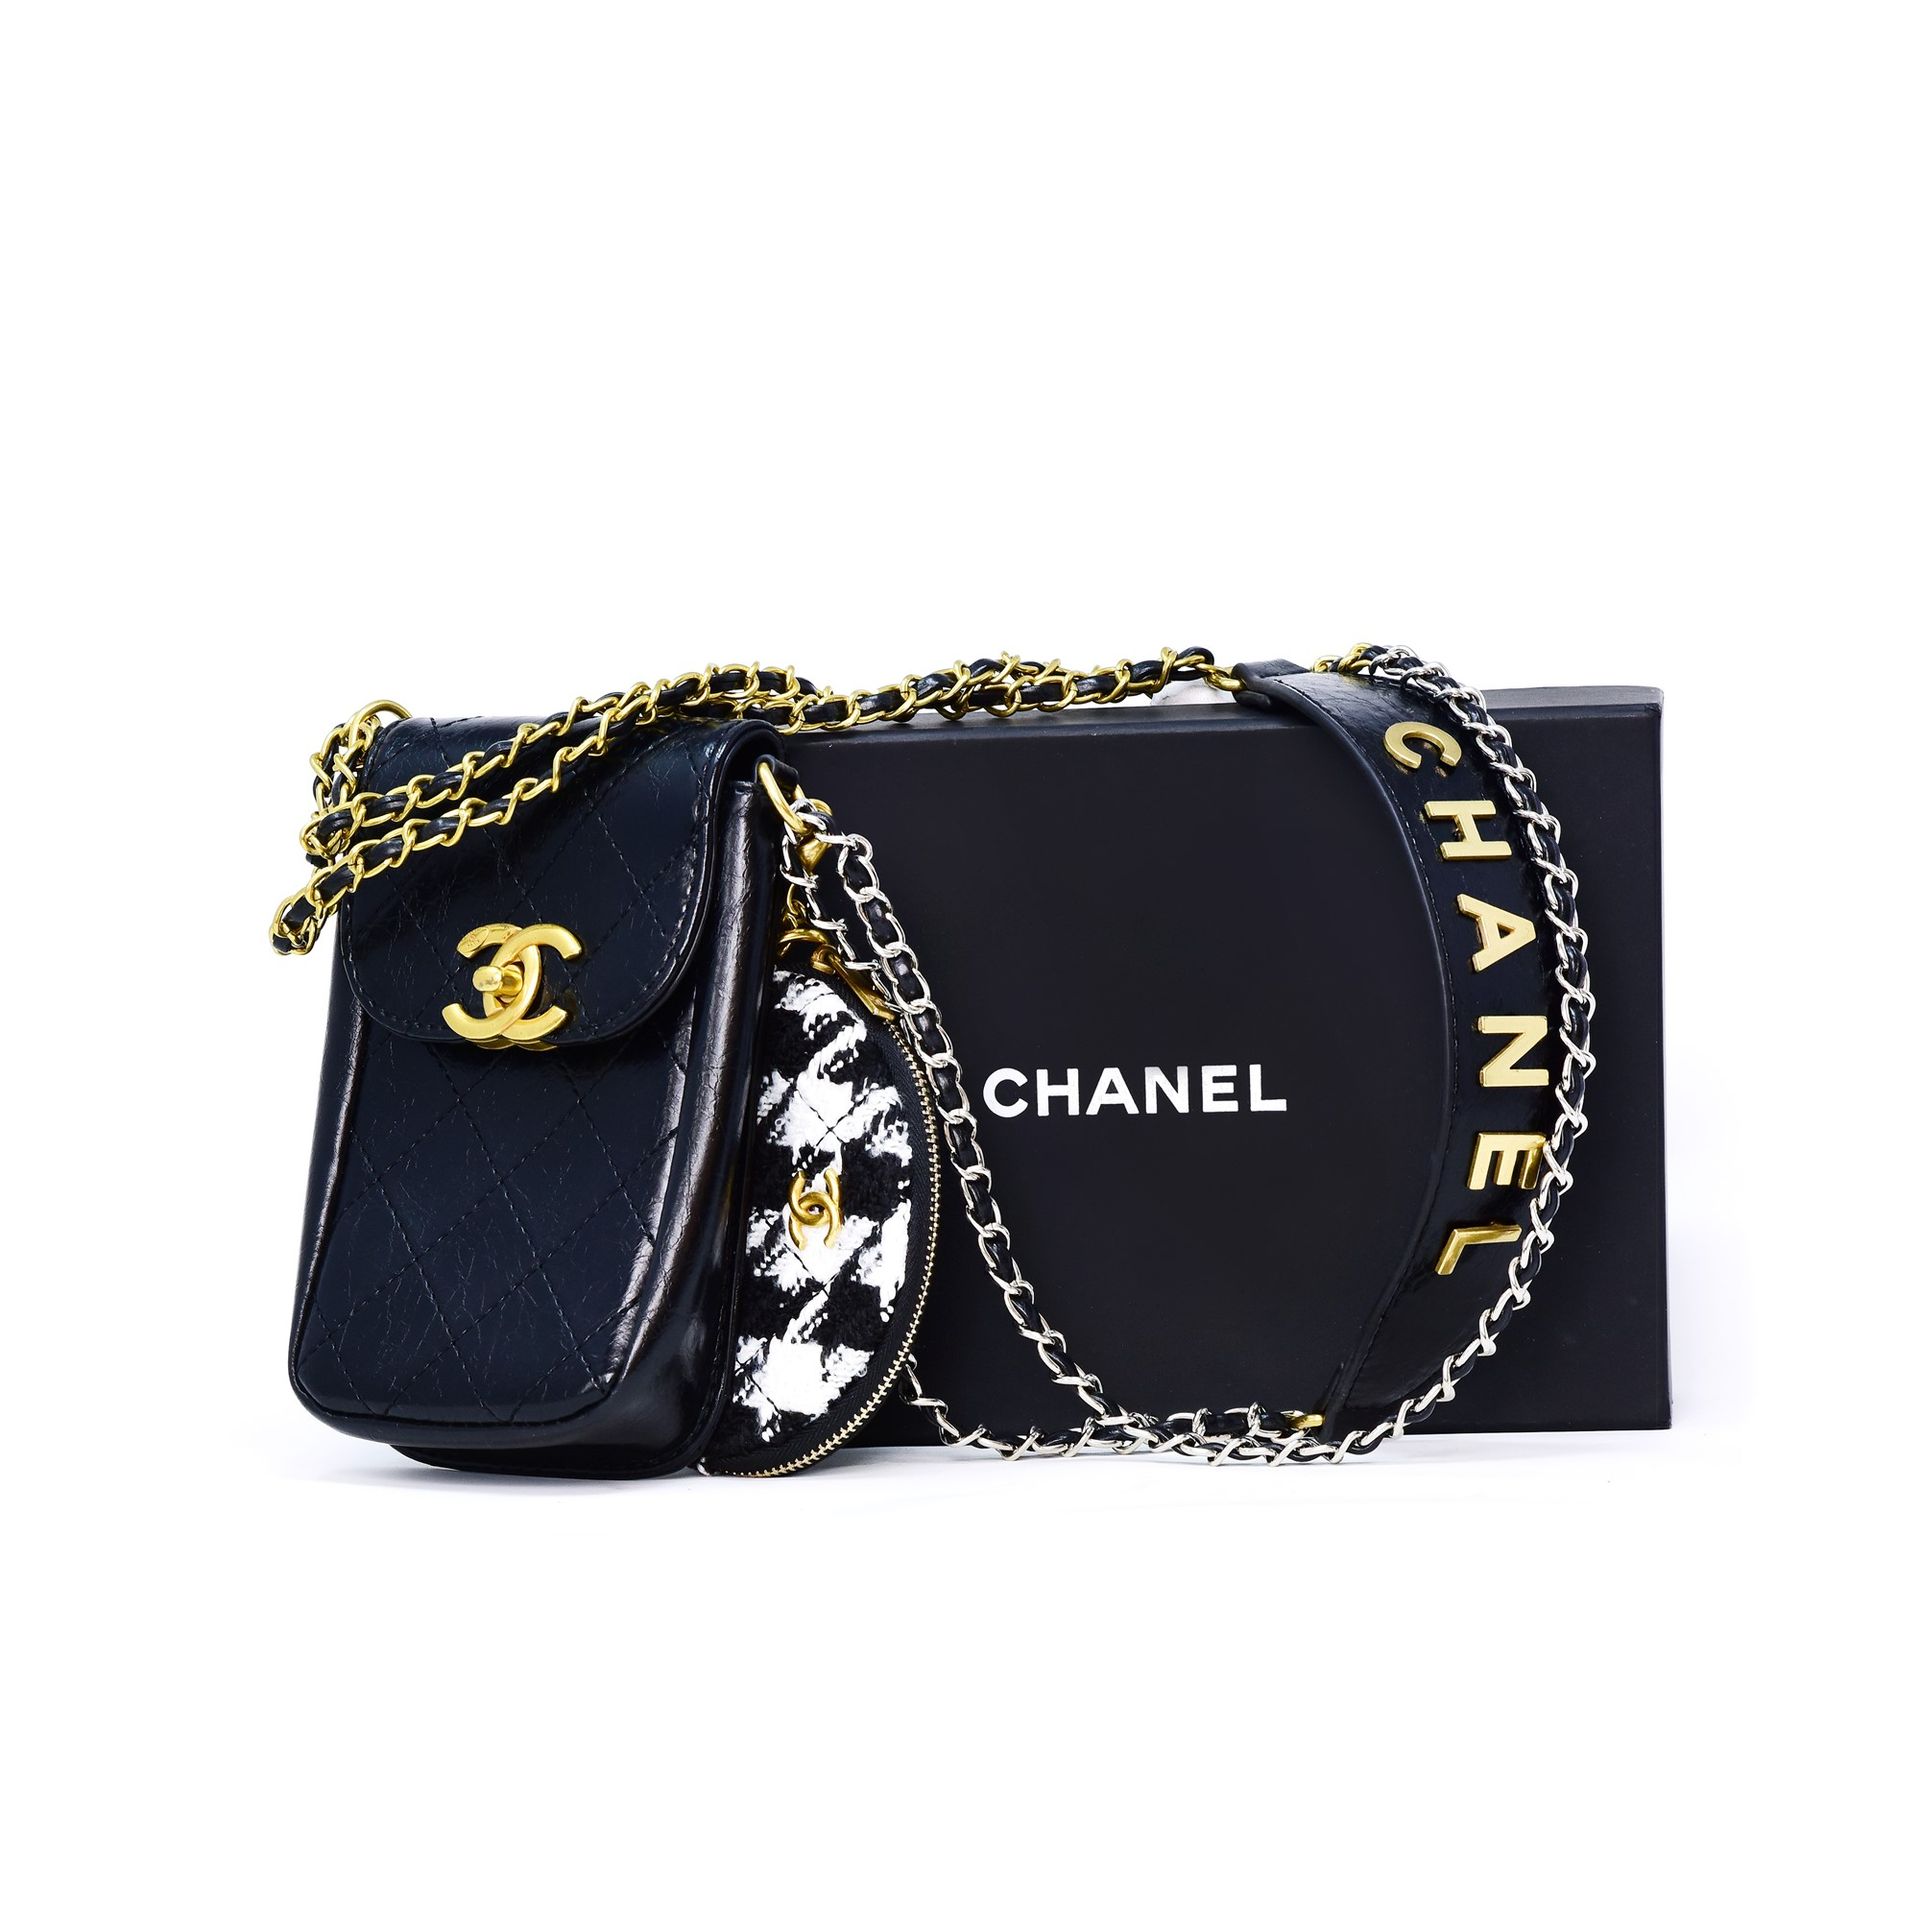 CHANEL Chanel leather shoulder bag with gold and silver metalwork.Monogram fabri&hellip;